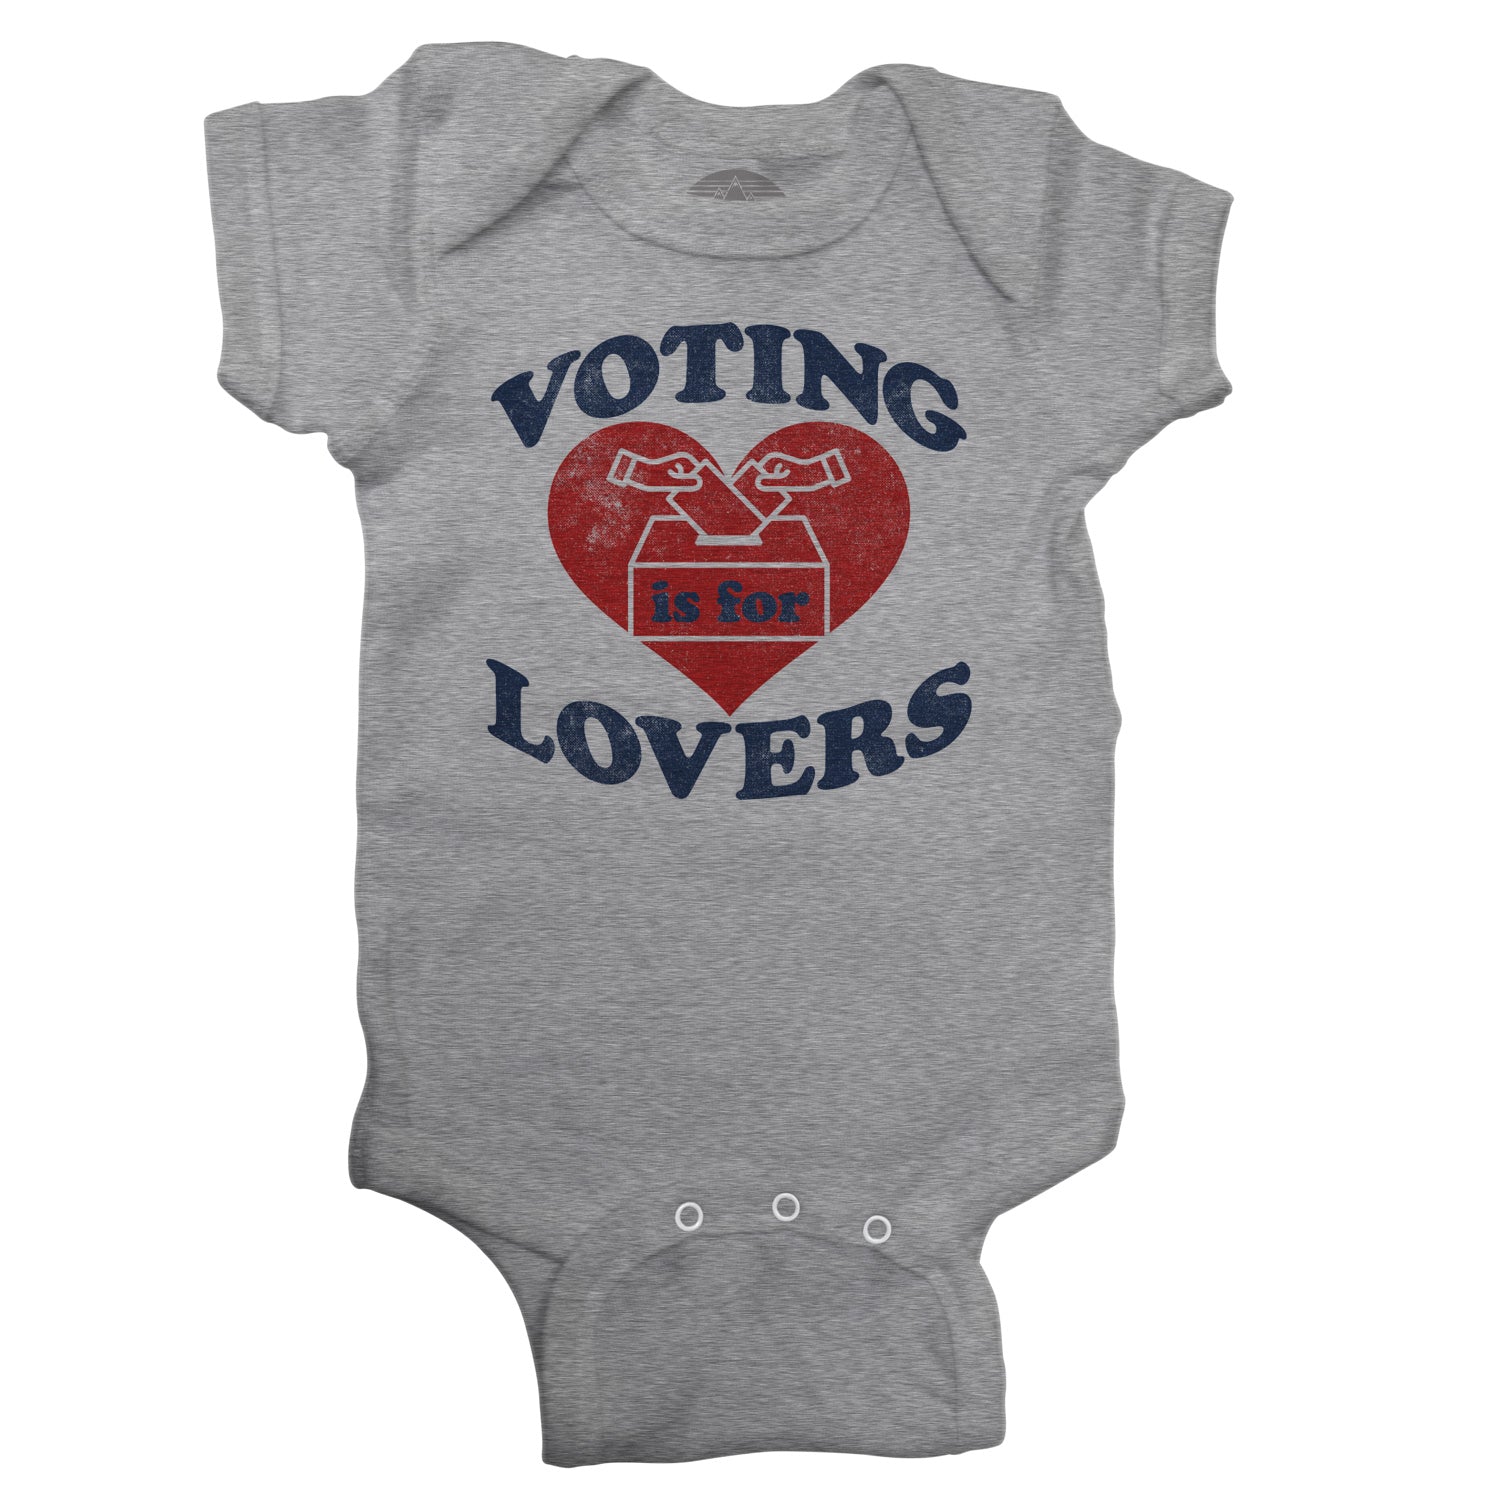 Voting Is For Lovers Infant Bodysuit - Unisex Fit